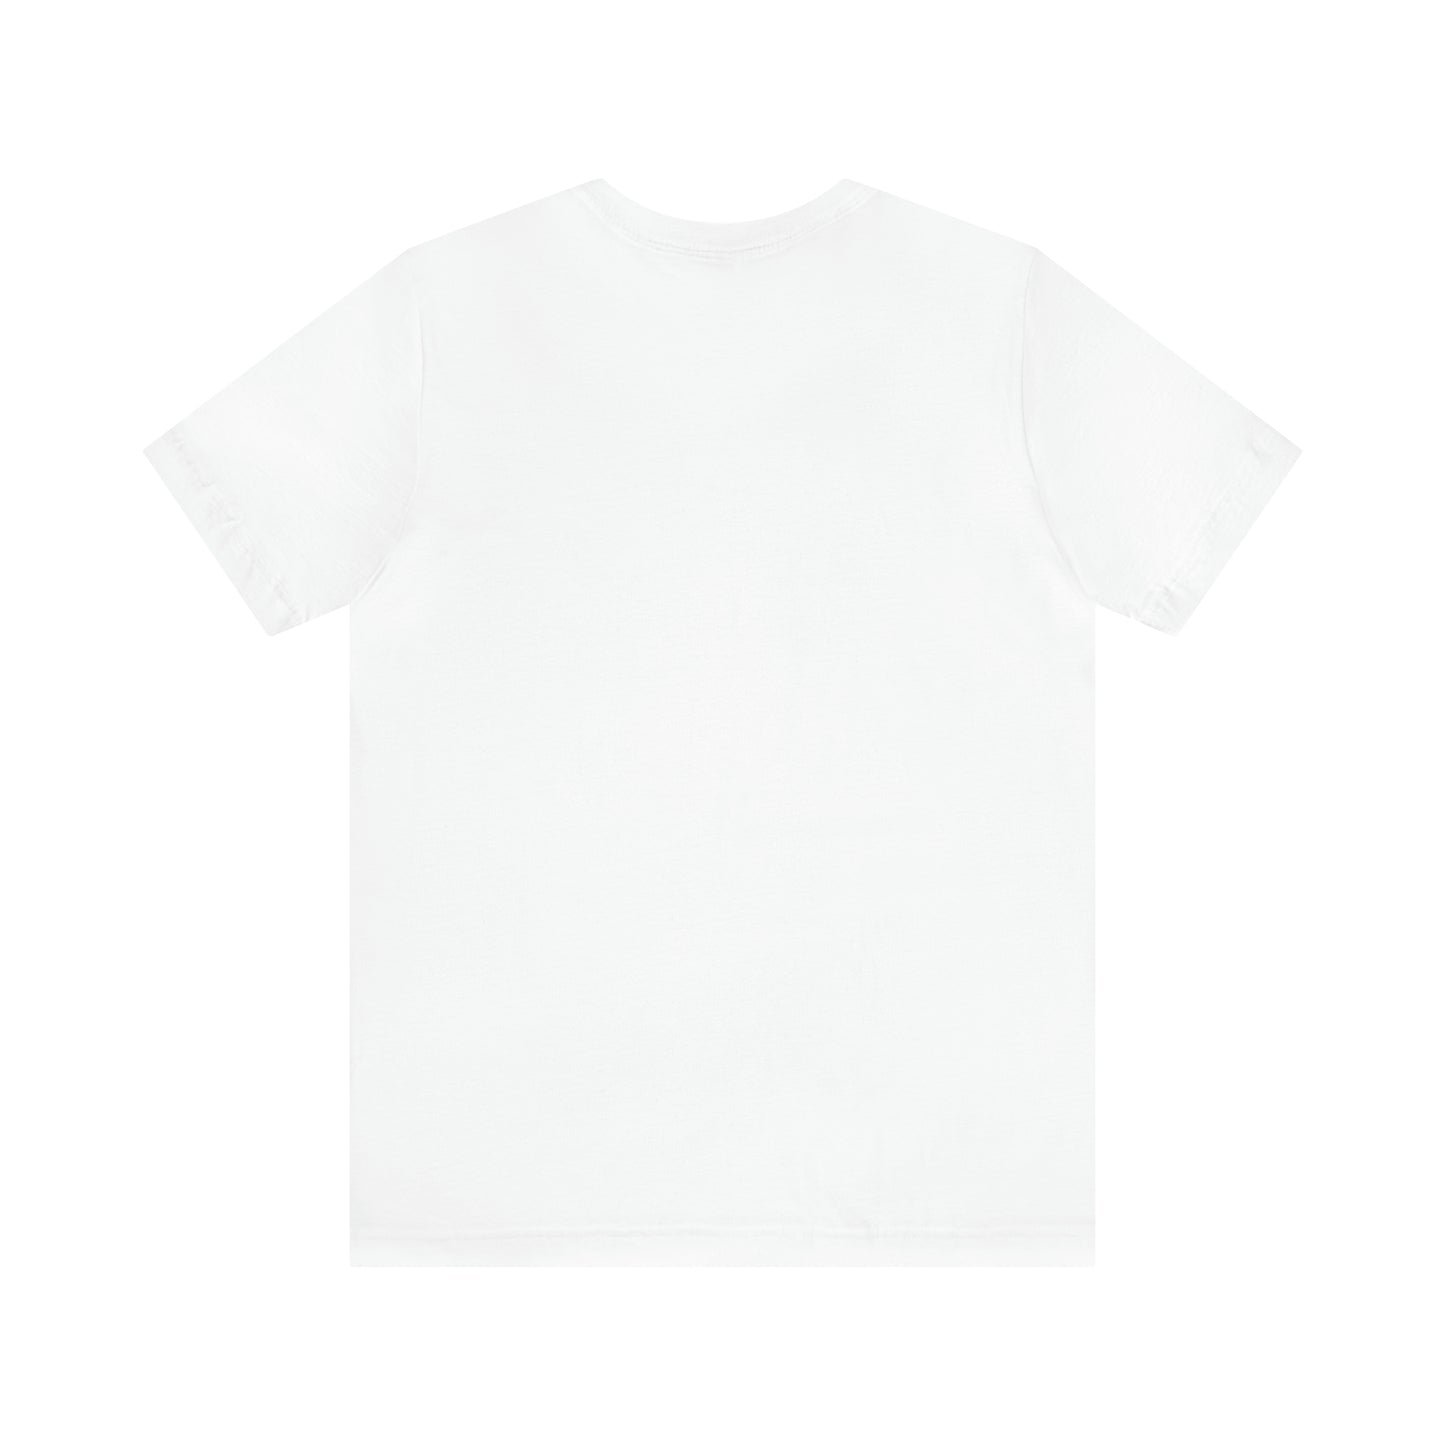 Back side of a white T-shirt with wolf print